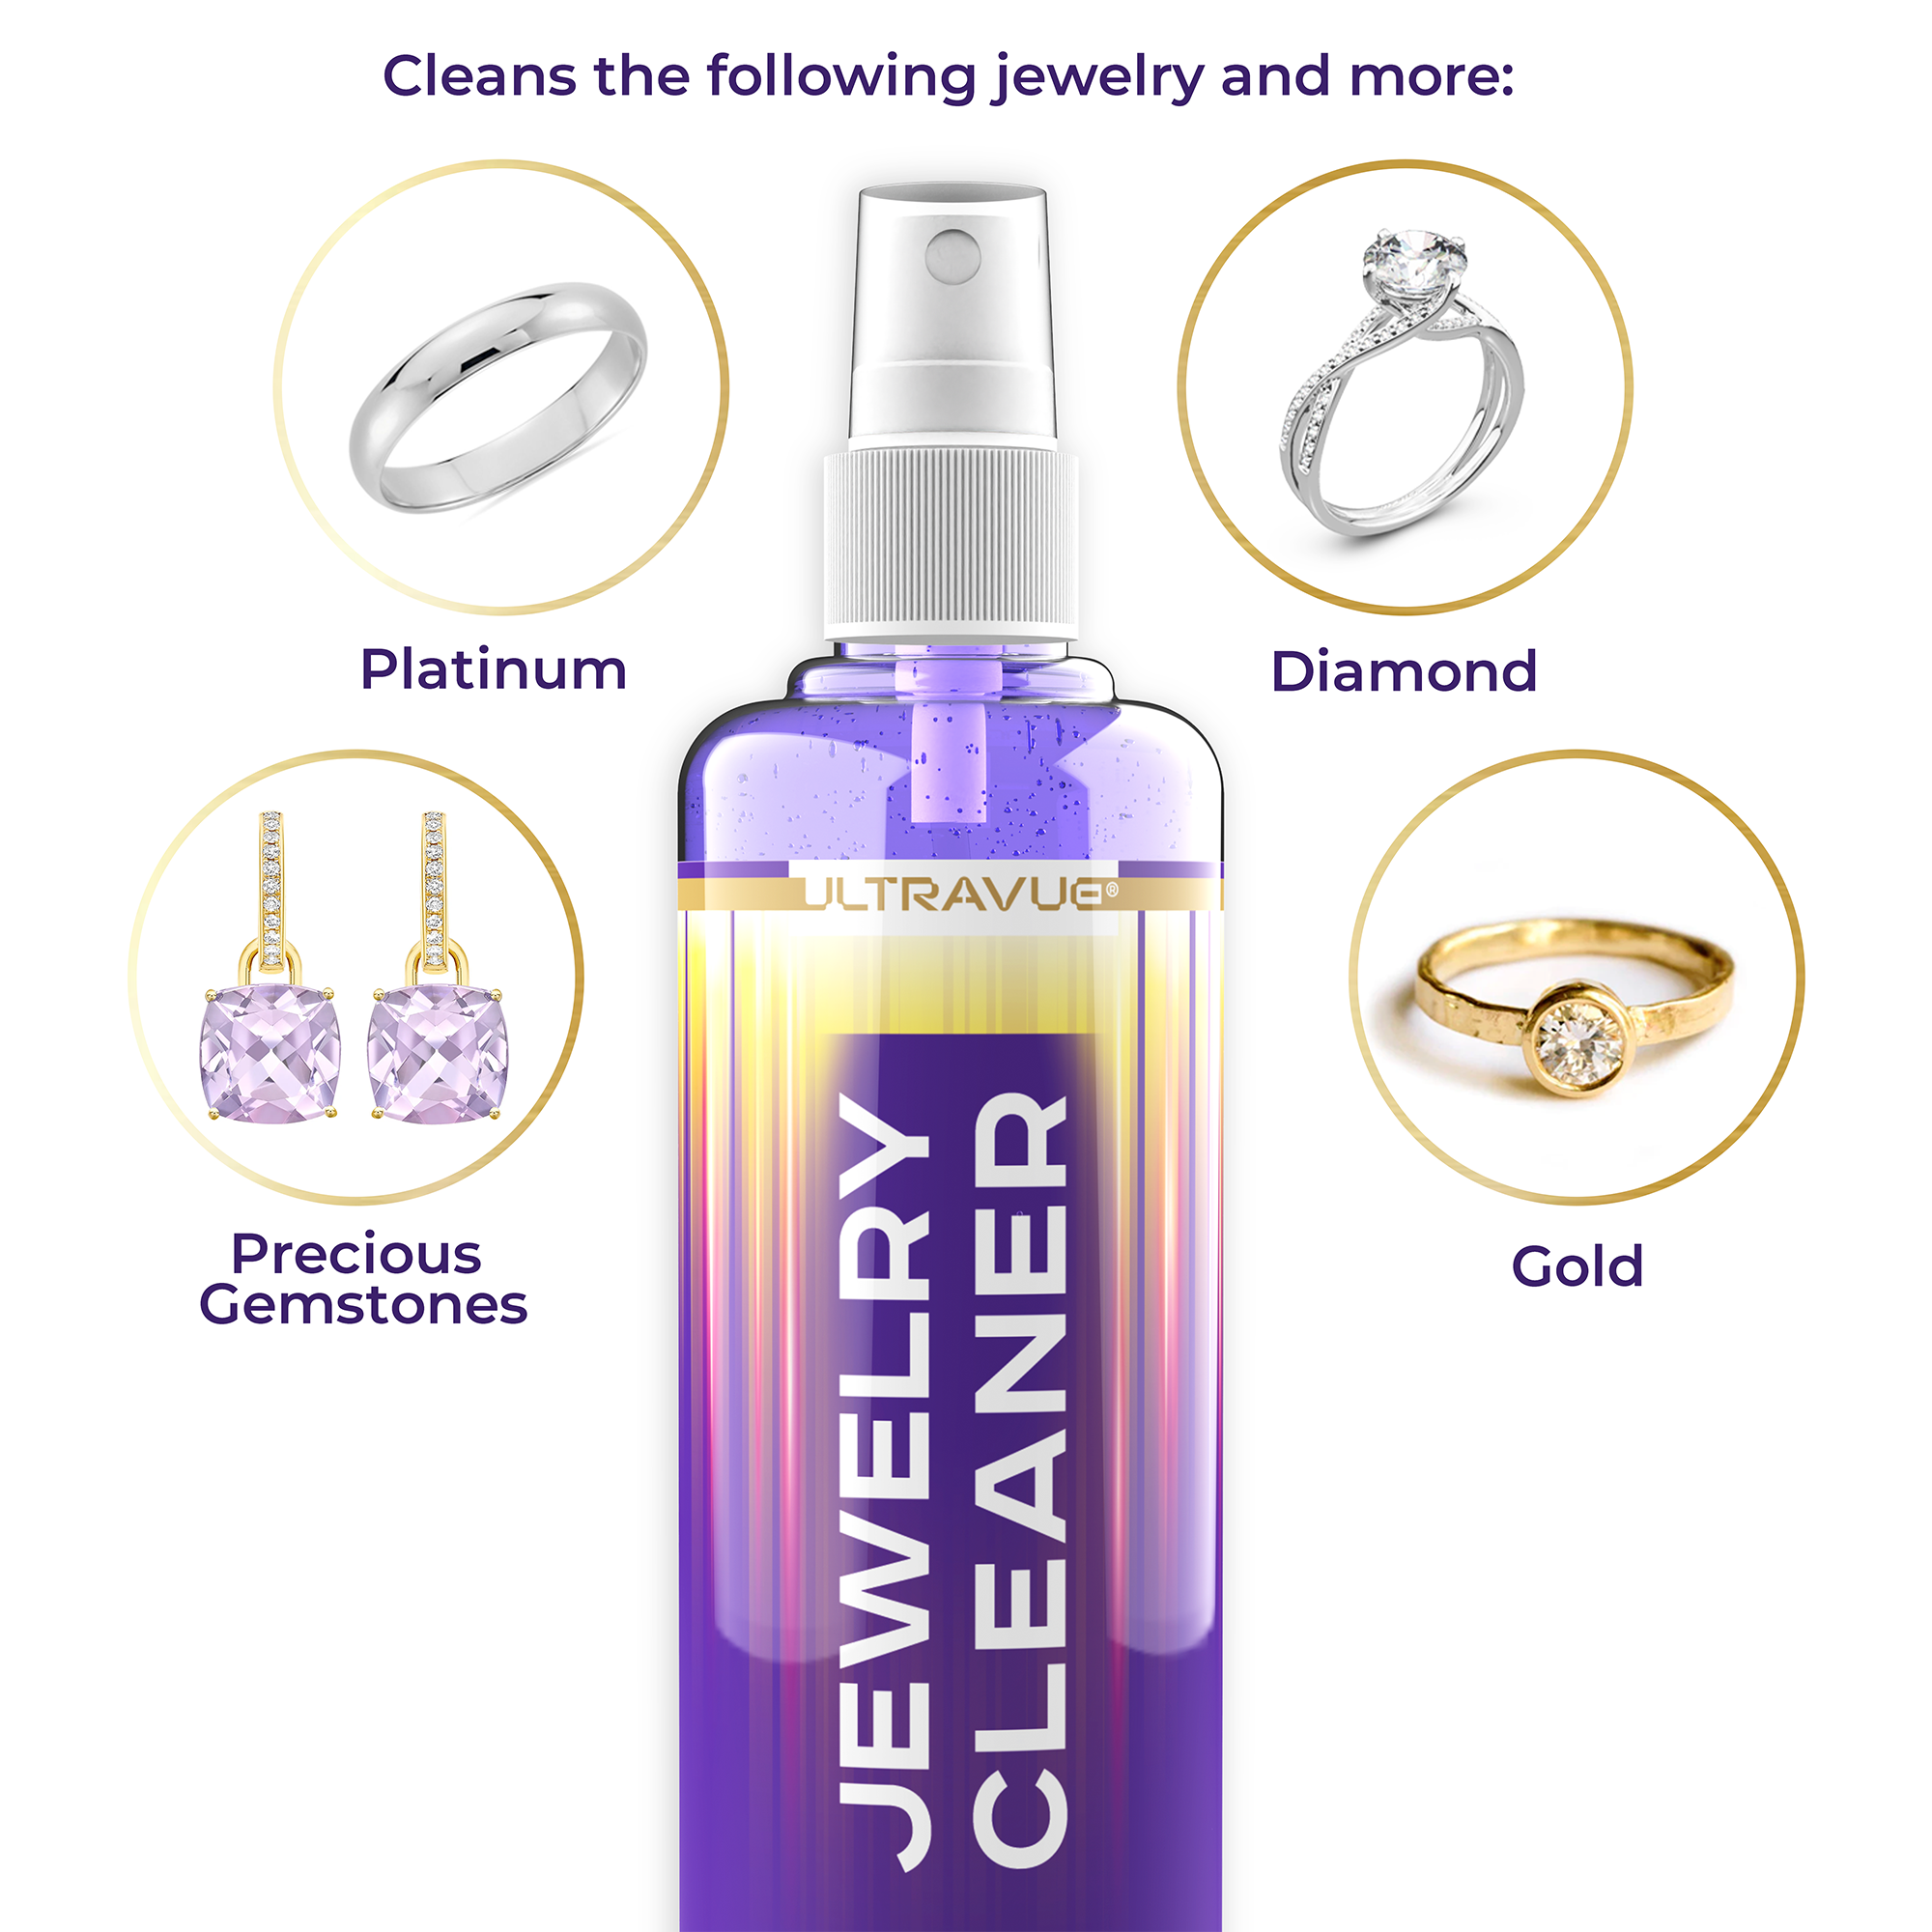 ULTRAVUE Jewelry Cleaner Set - Cleans All Jewels, Diamonds, Gold, Silver Earring Cleaner & Gem Cleaner - 1 x 2oz and 1 x 8oz Jewelry Cleaner Gel Spray, 3 x Microfiber Cloth, 2 x Horsehair Brush.